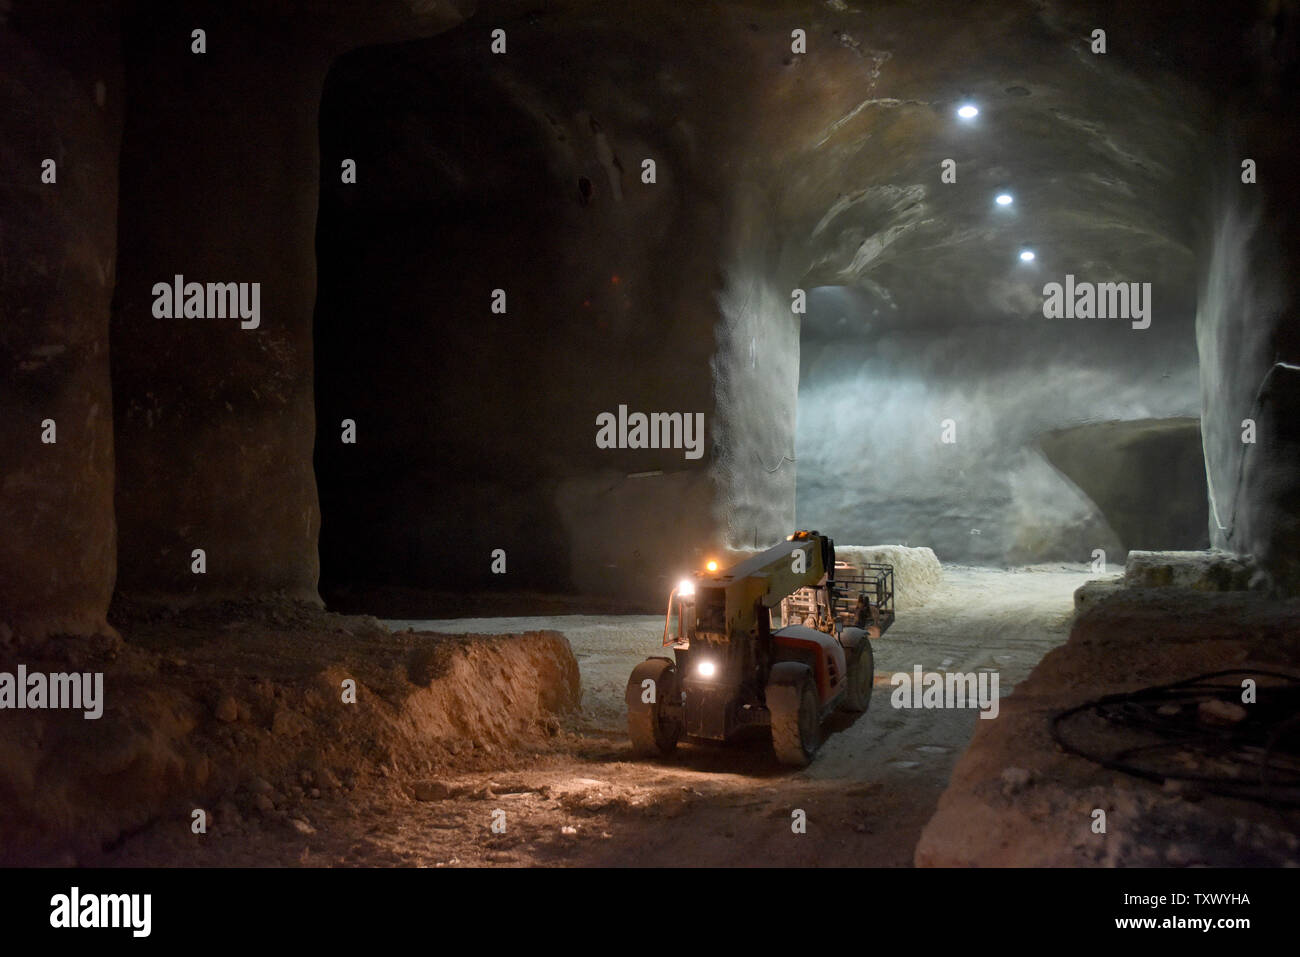 Heavy equipment works on catacomb burial plots in the underground burial tunnels at the Givat Shaul Cemetery, Har HaMenuchot, in Jerusalem, Israel, November 26, 2017.  Due to overcrowding and lack of land for burial sites in Jerusalem, the religious burial society called Chevra Kadisha, is building the massive underground burial site that will provide space for more than 22,000 graves.   Photo by Debbie Hill/UPI Stock Photo